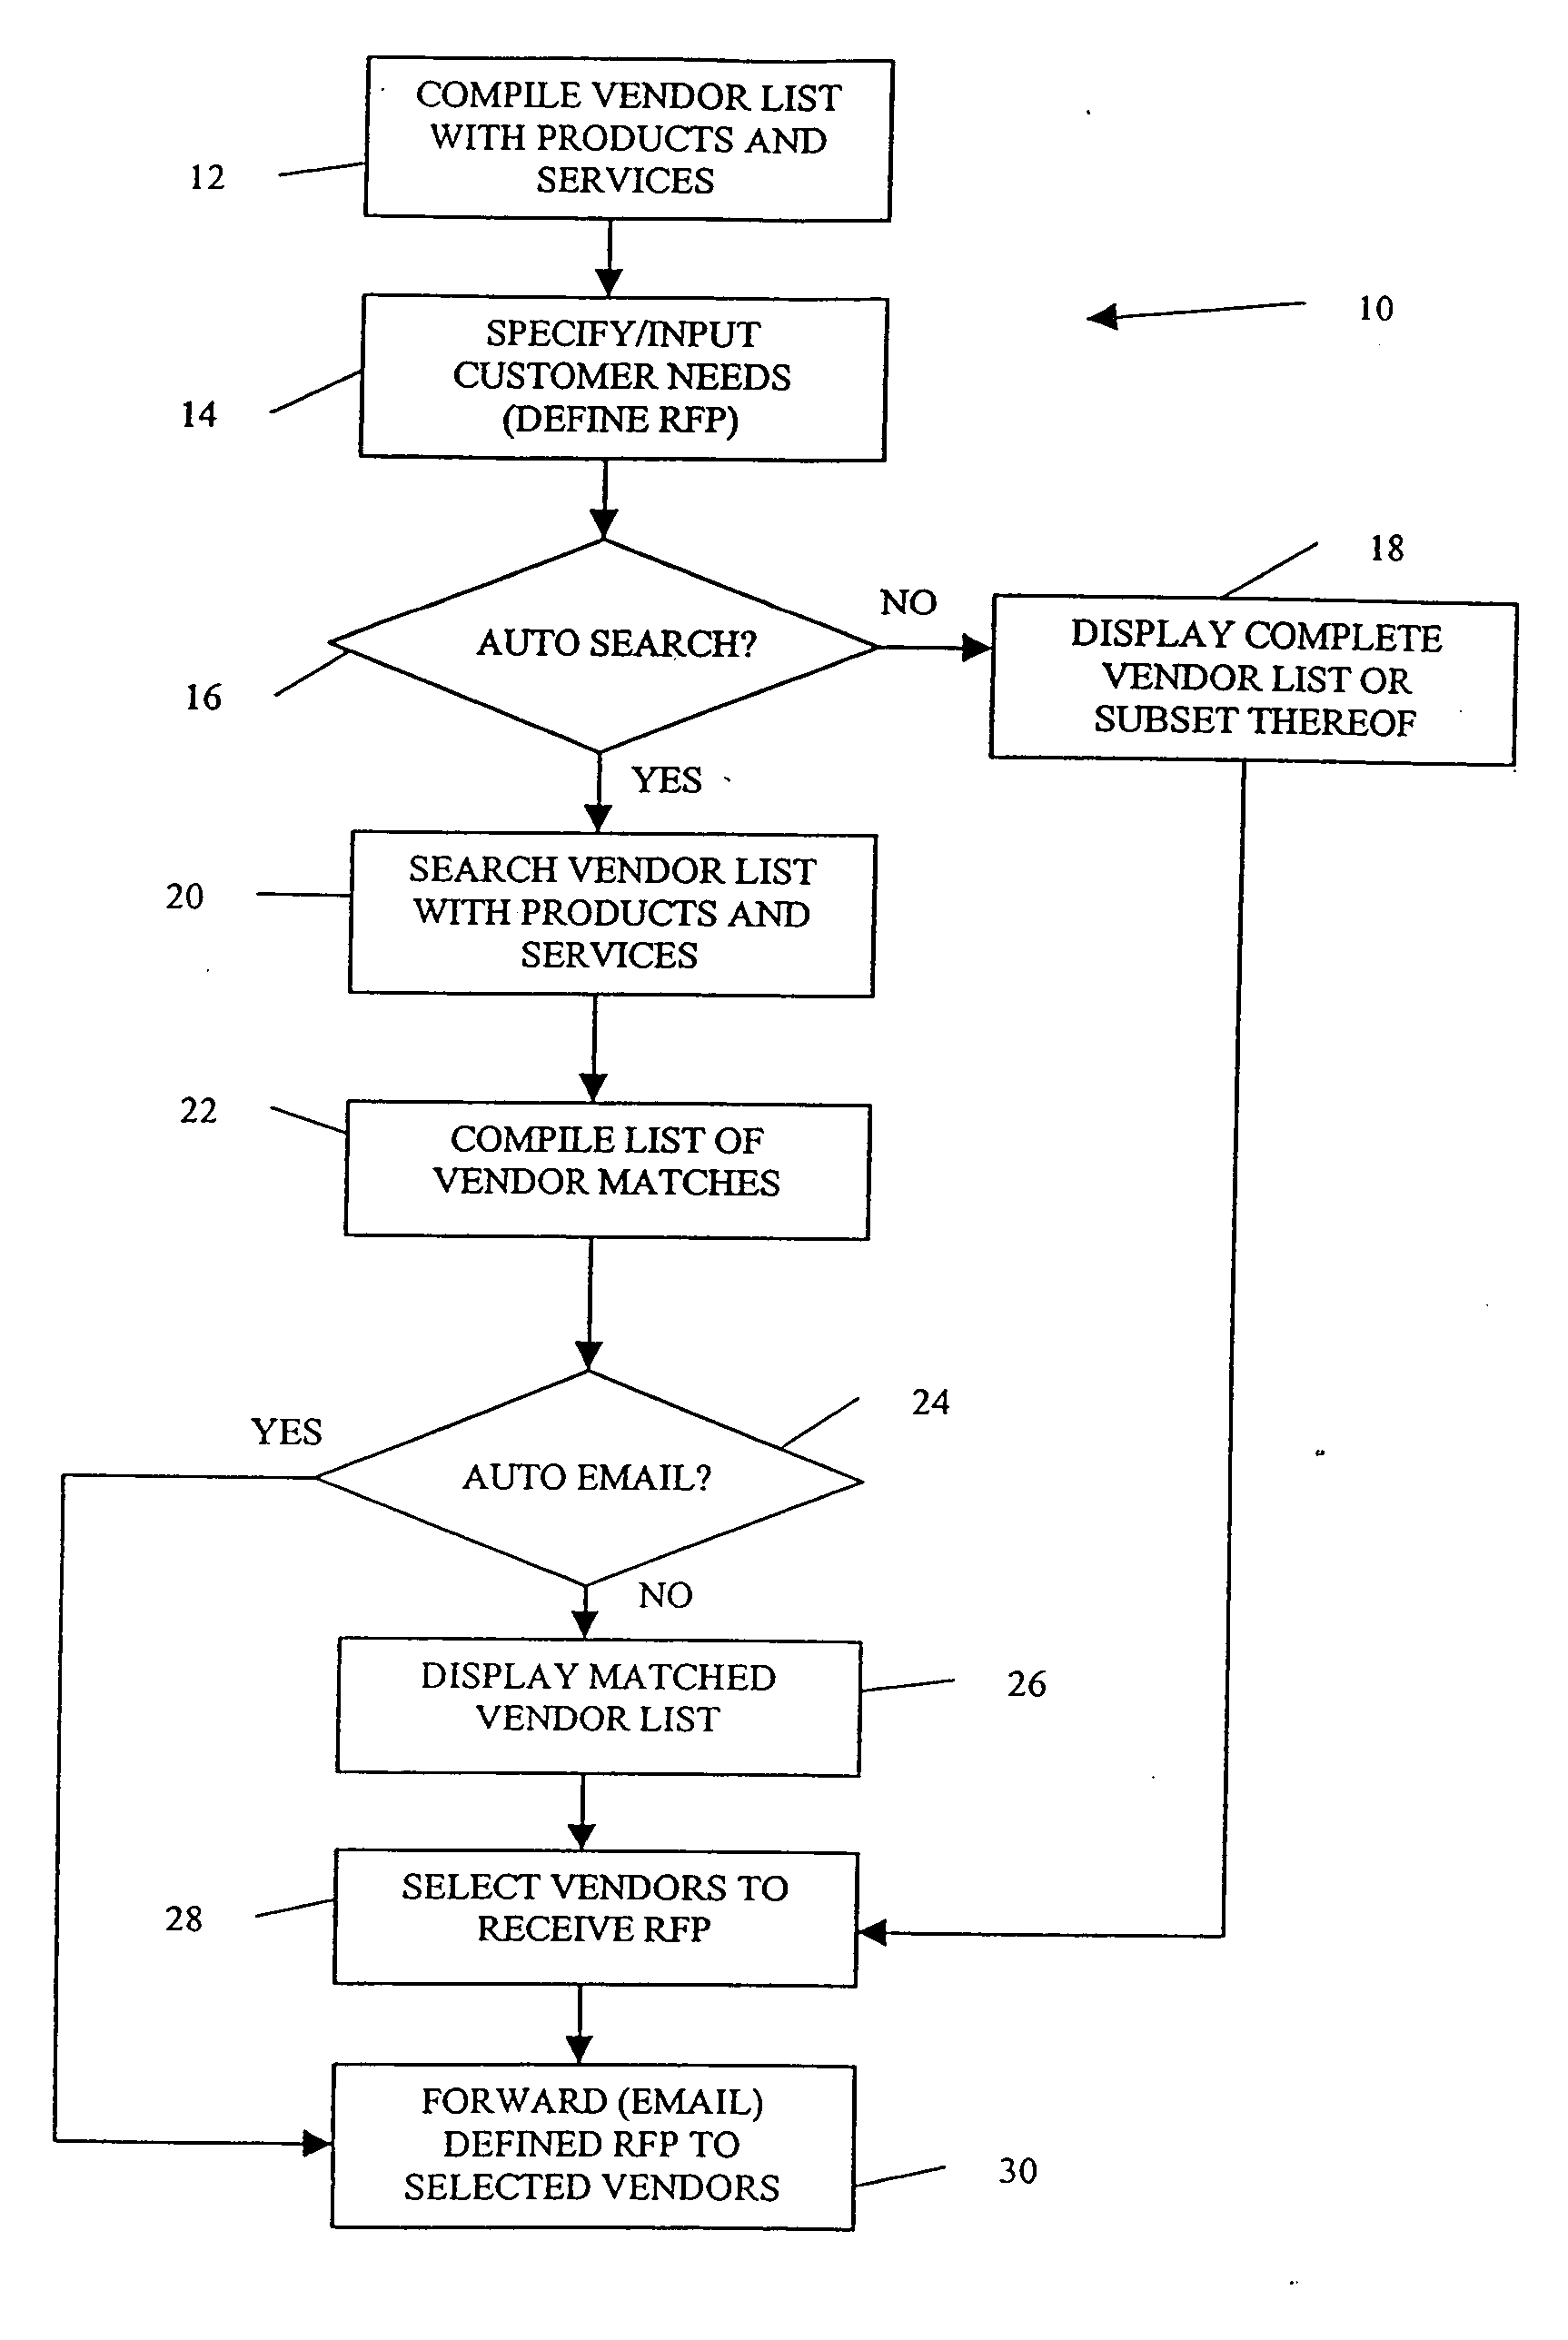 Method for providing online submission of requests for proposals for forwarding to identified vendors